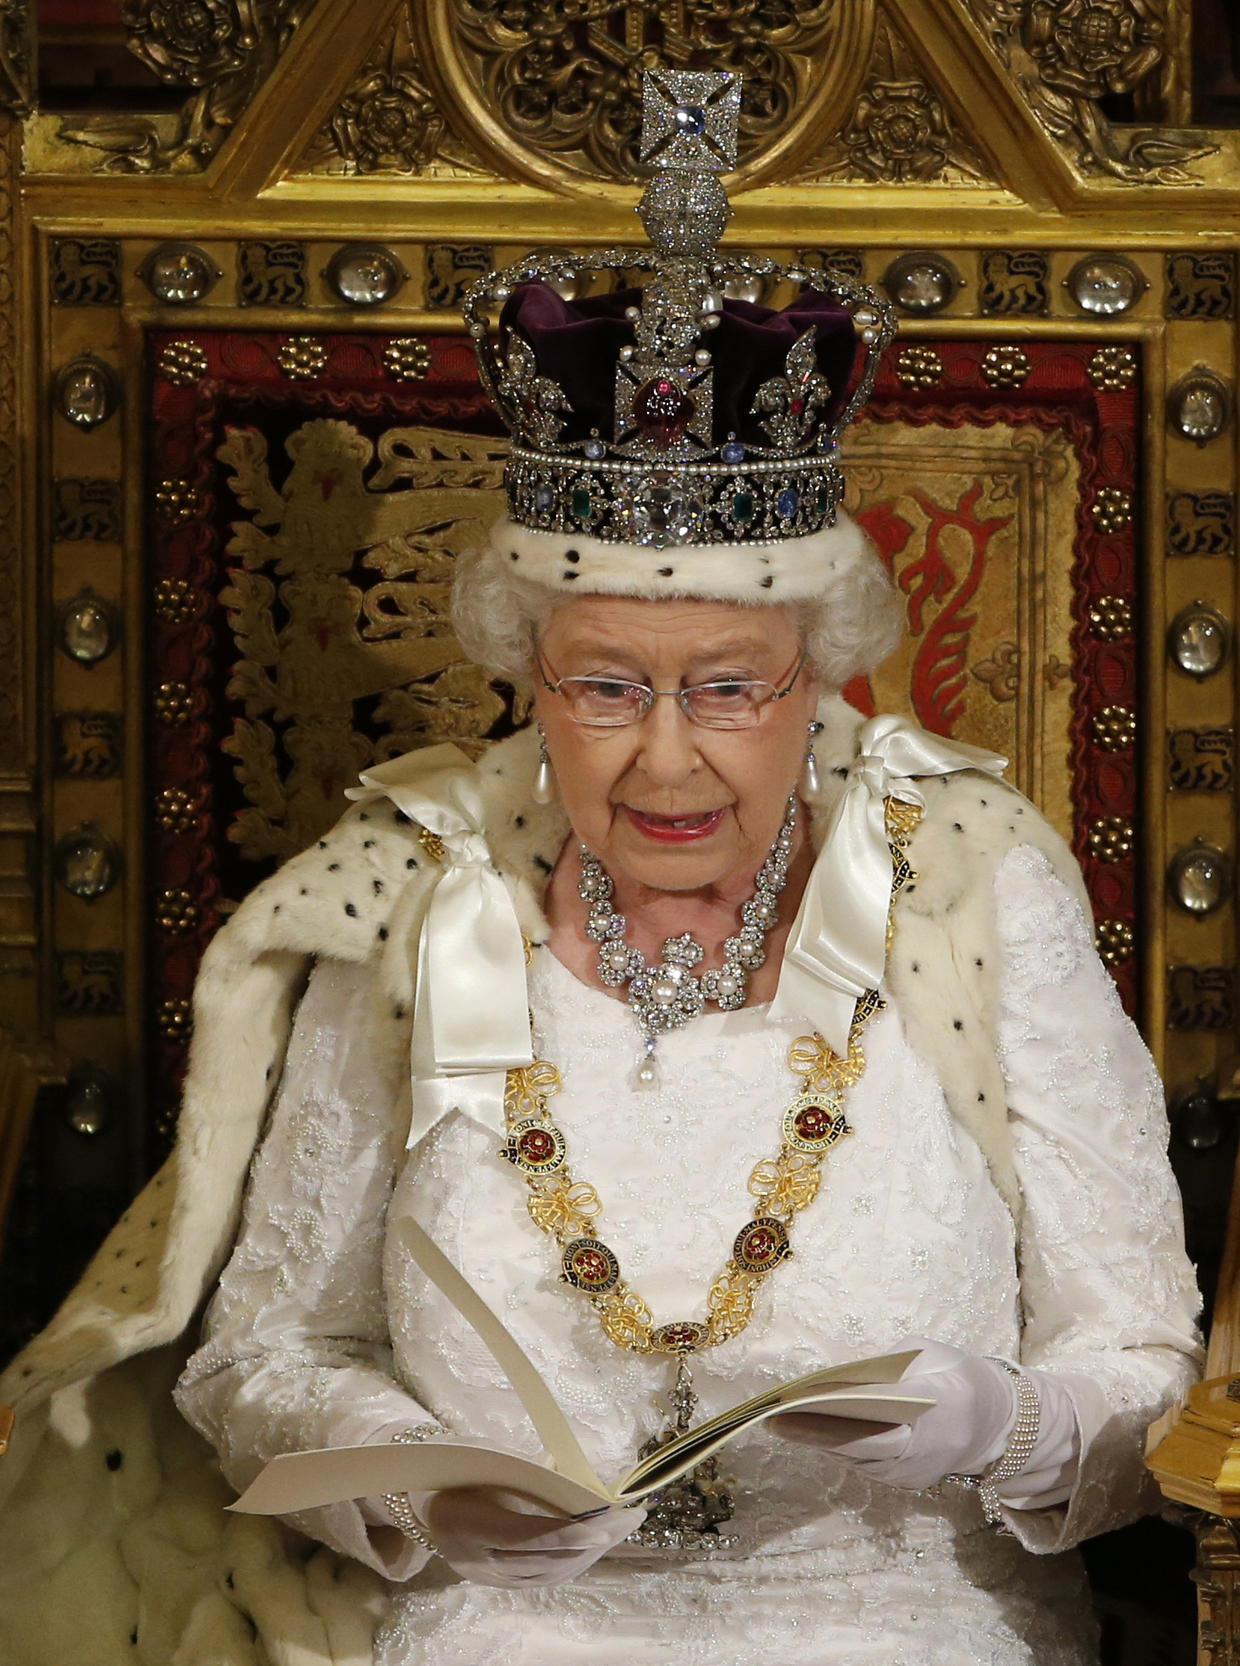 Queen Elizabeth II attends the state opening of Parliament CBS News